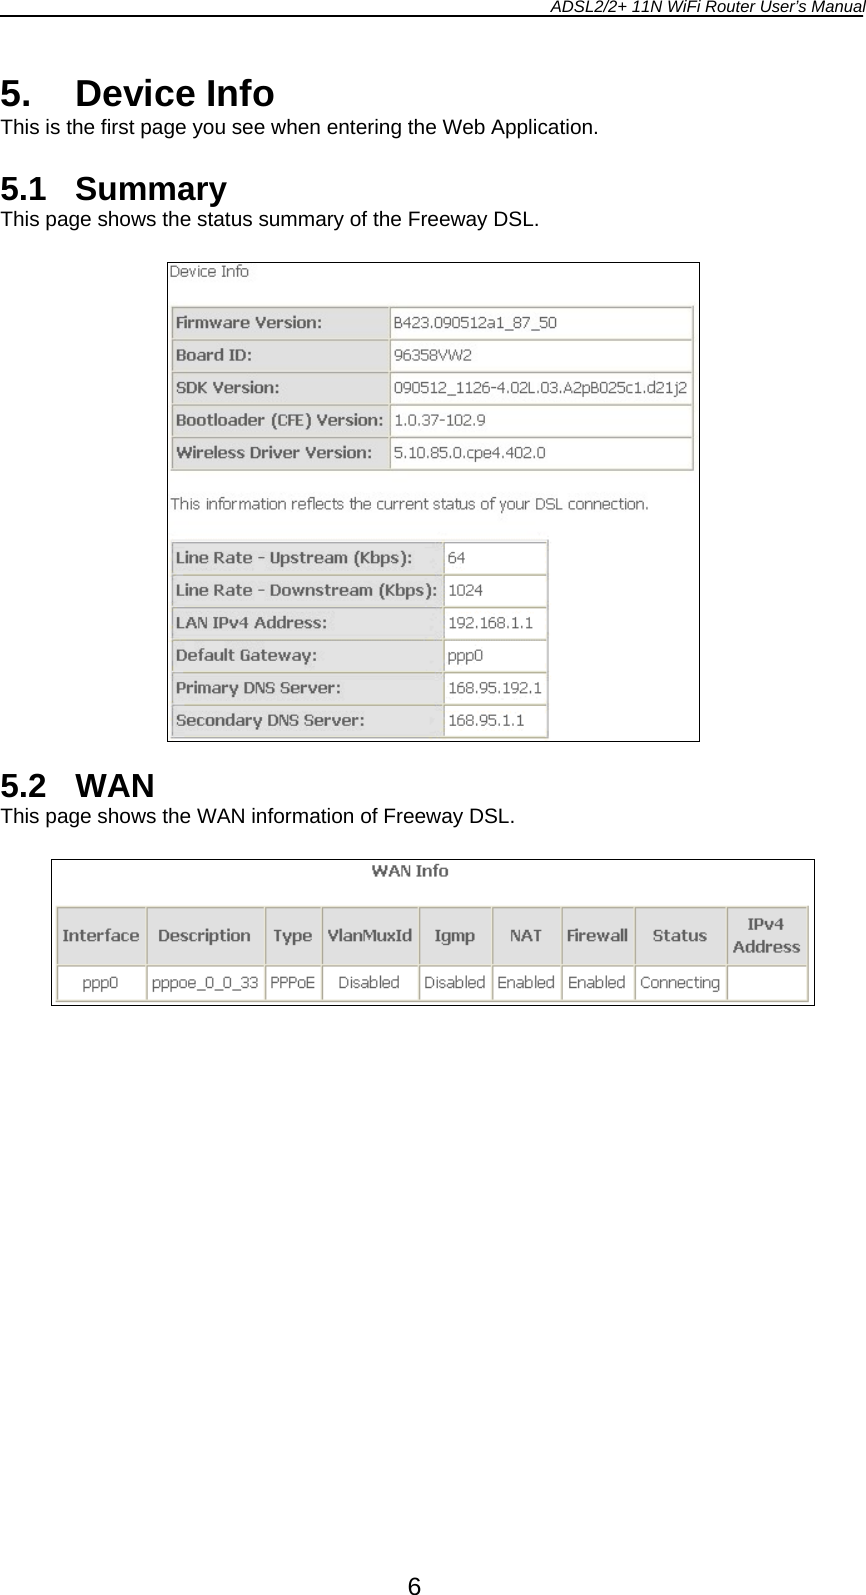 ADSL2/2+ 11N WiFi Router User’s Manual  6 5. Device Info This is the first page you see when entering the Web Application.  5.1 Summary This page shows the status summary of the Freeway DSL.    5.2 WAN This page shows the WAN information of Freeway DSL.    